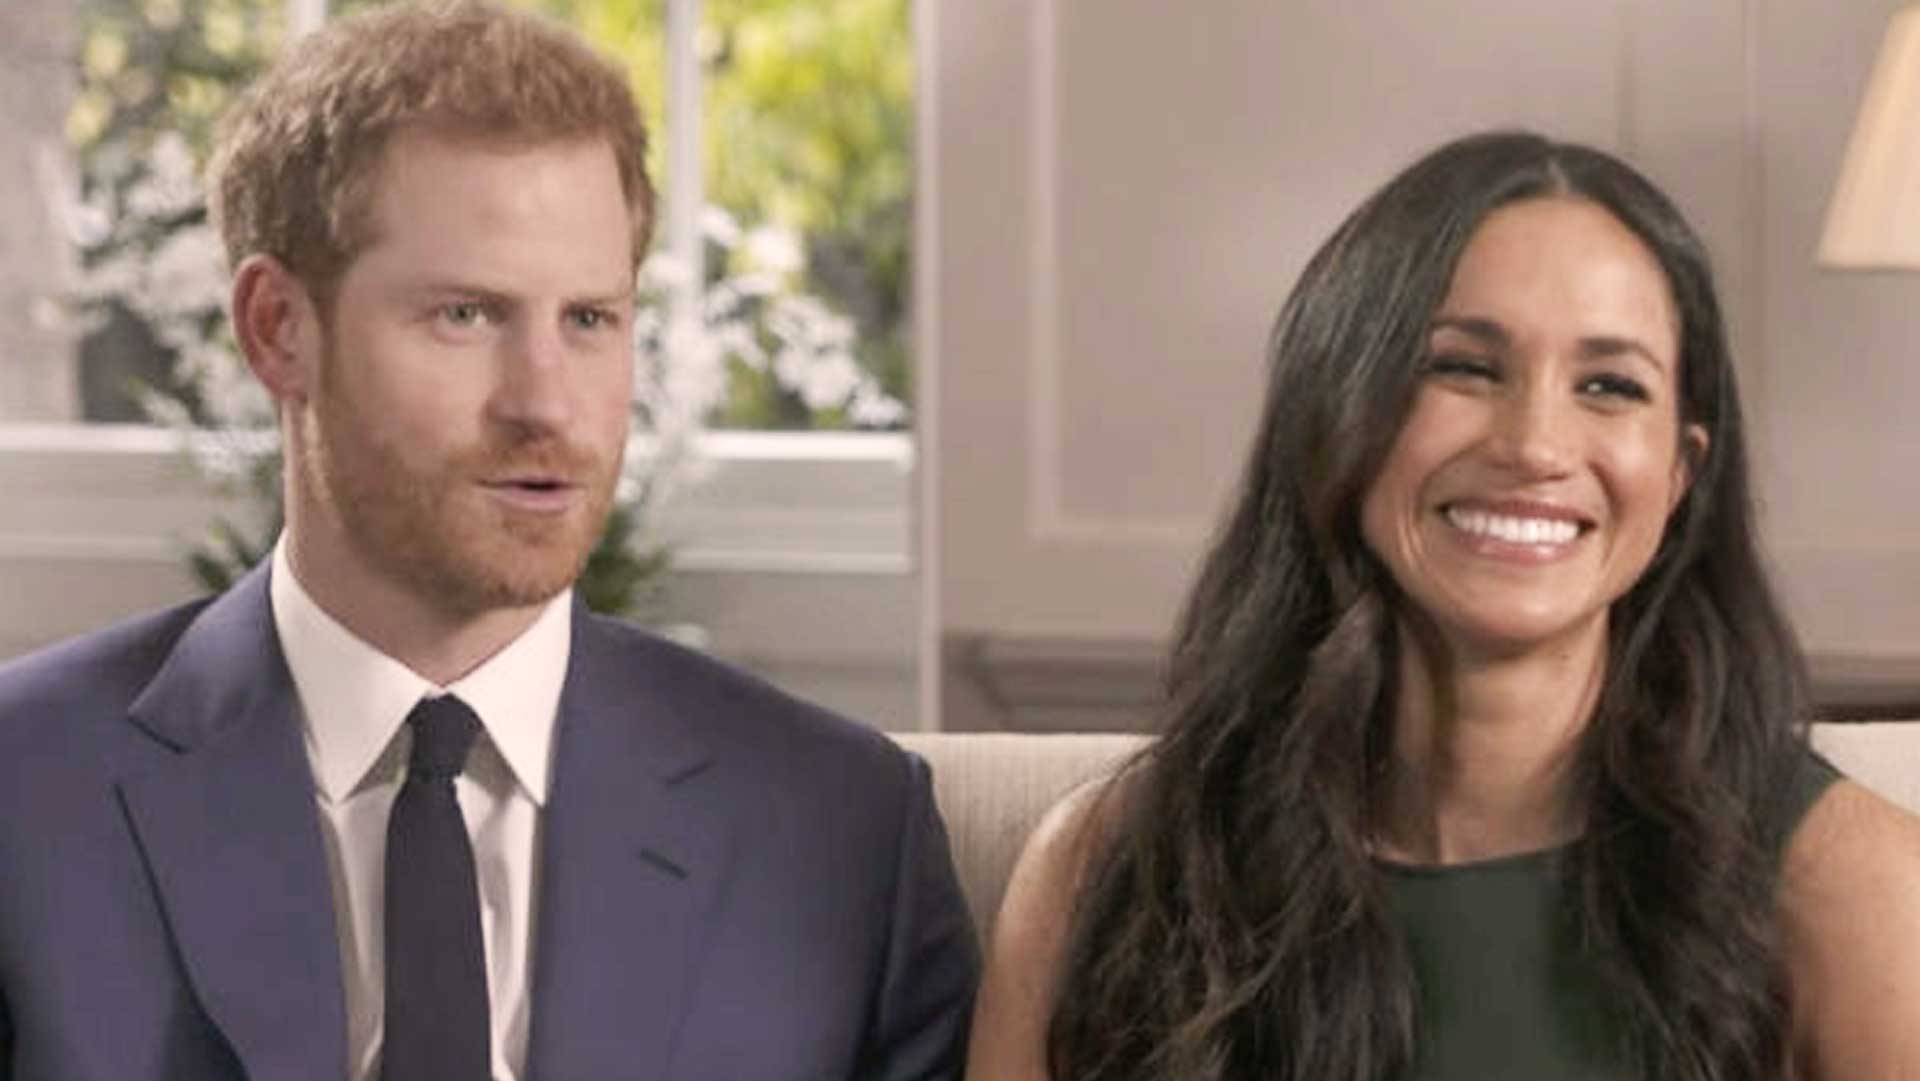 Prince Harry and Meghan Markle beam as they give their first interview as an engaged couple